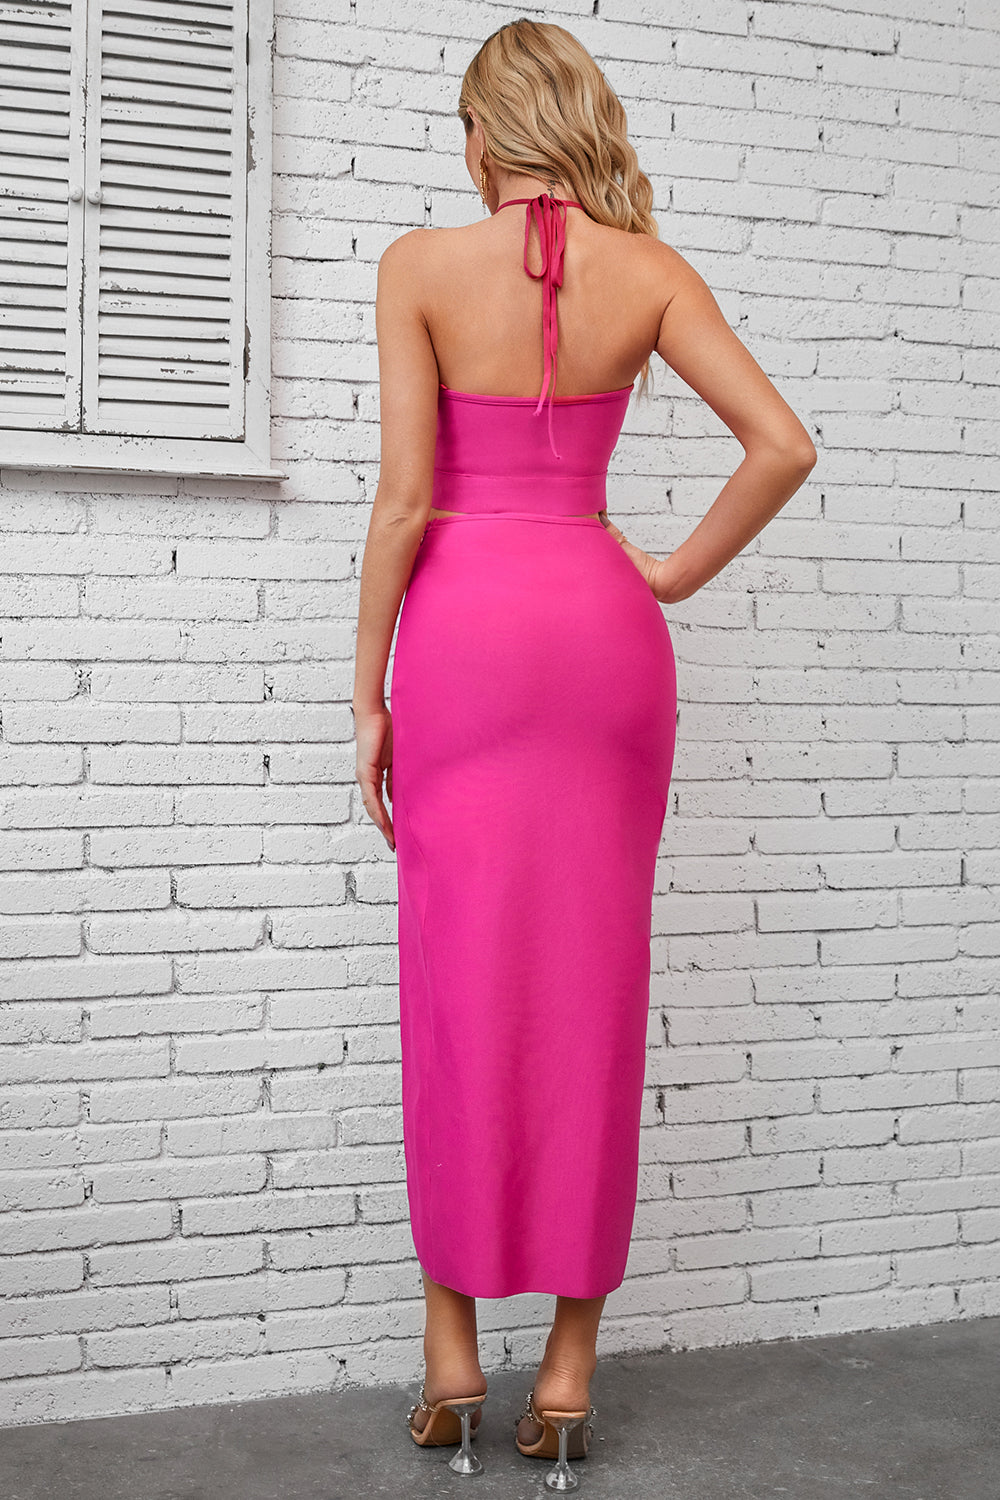 Sesidy Vita Two Piece Halter Cut Out Dress in Pink